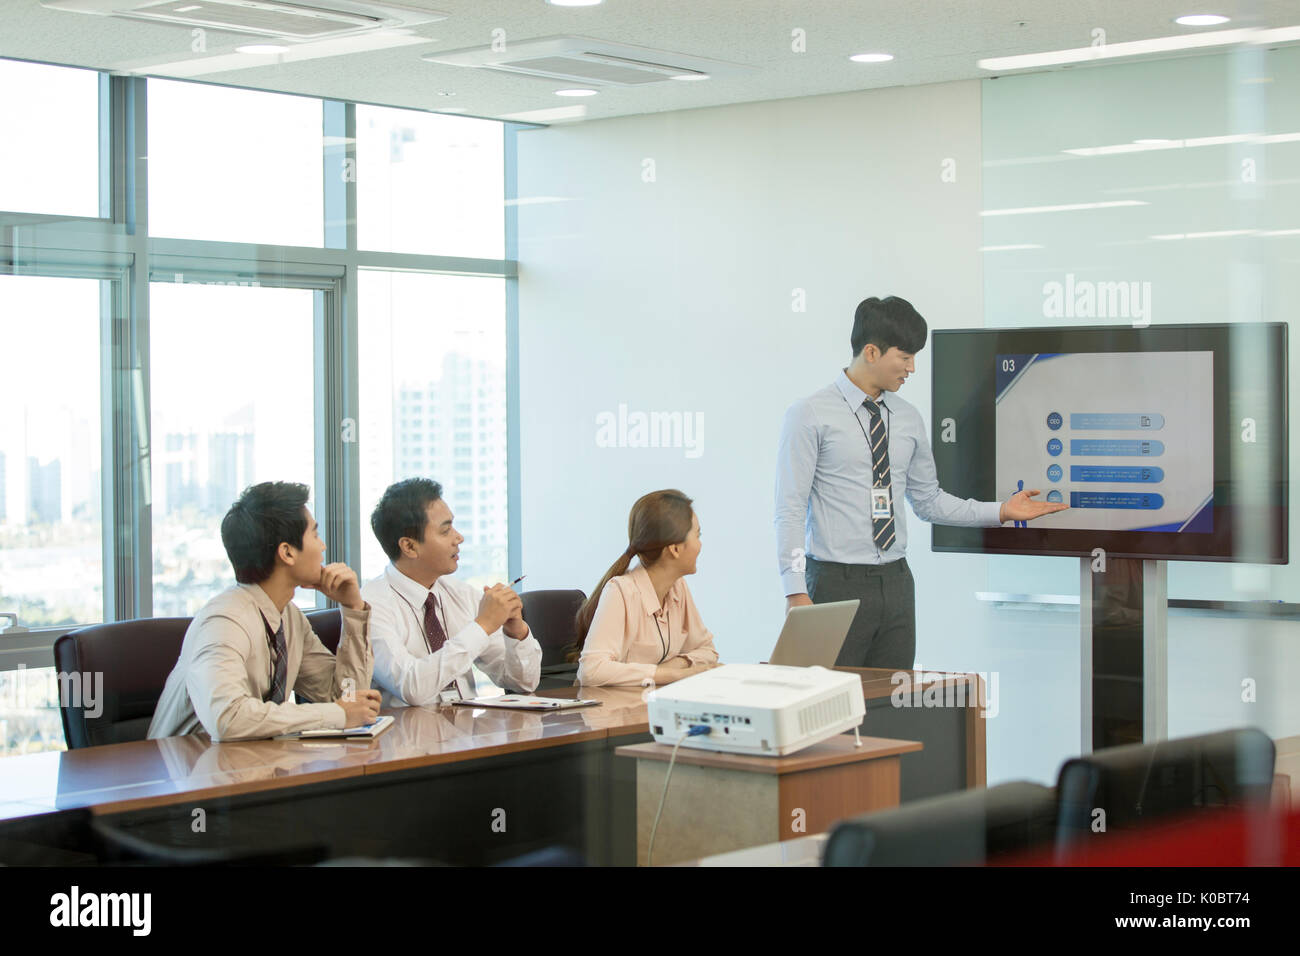 Young businessman having a presentation in front of his coworkers Stock Photo